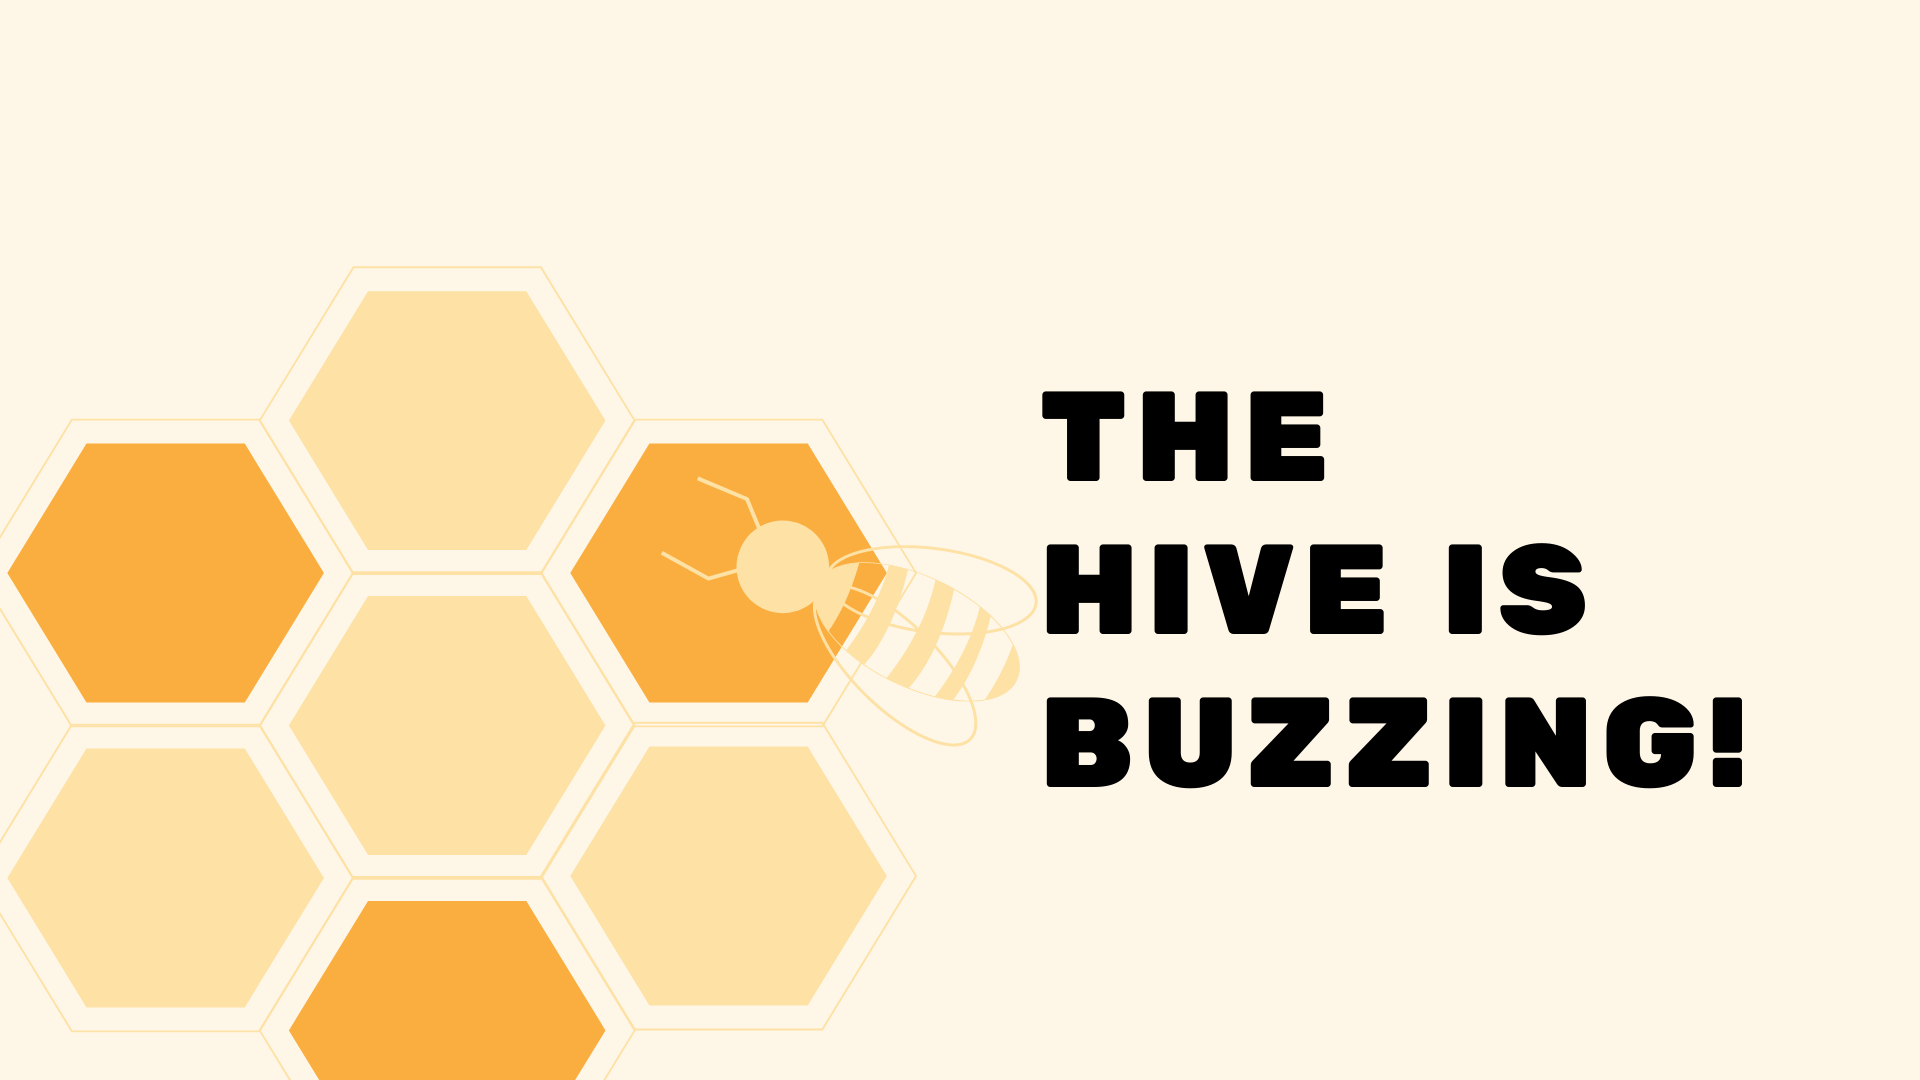 the hive is buzzing! - 305 Hive